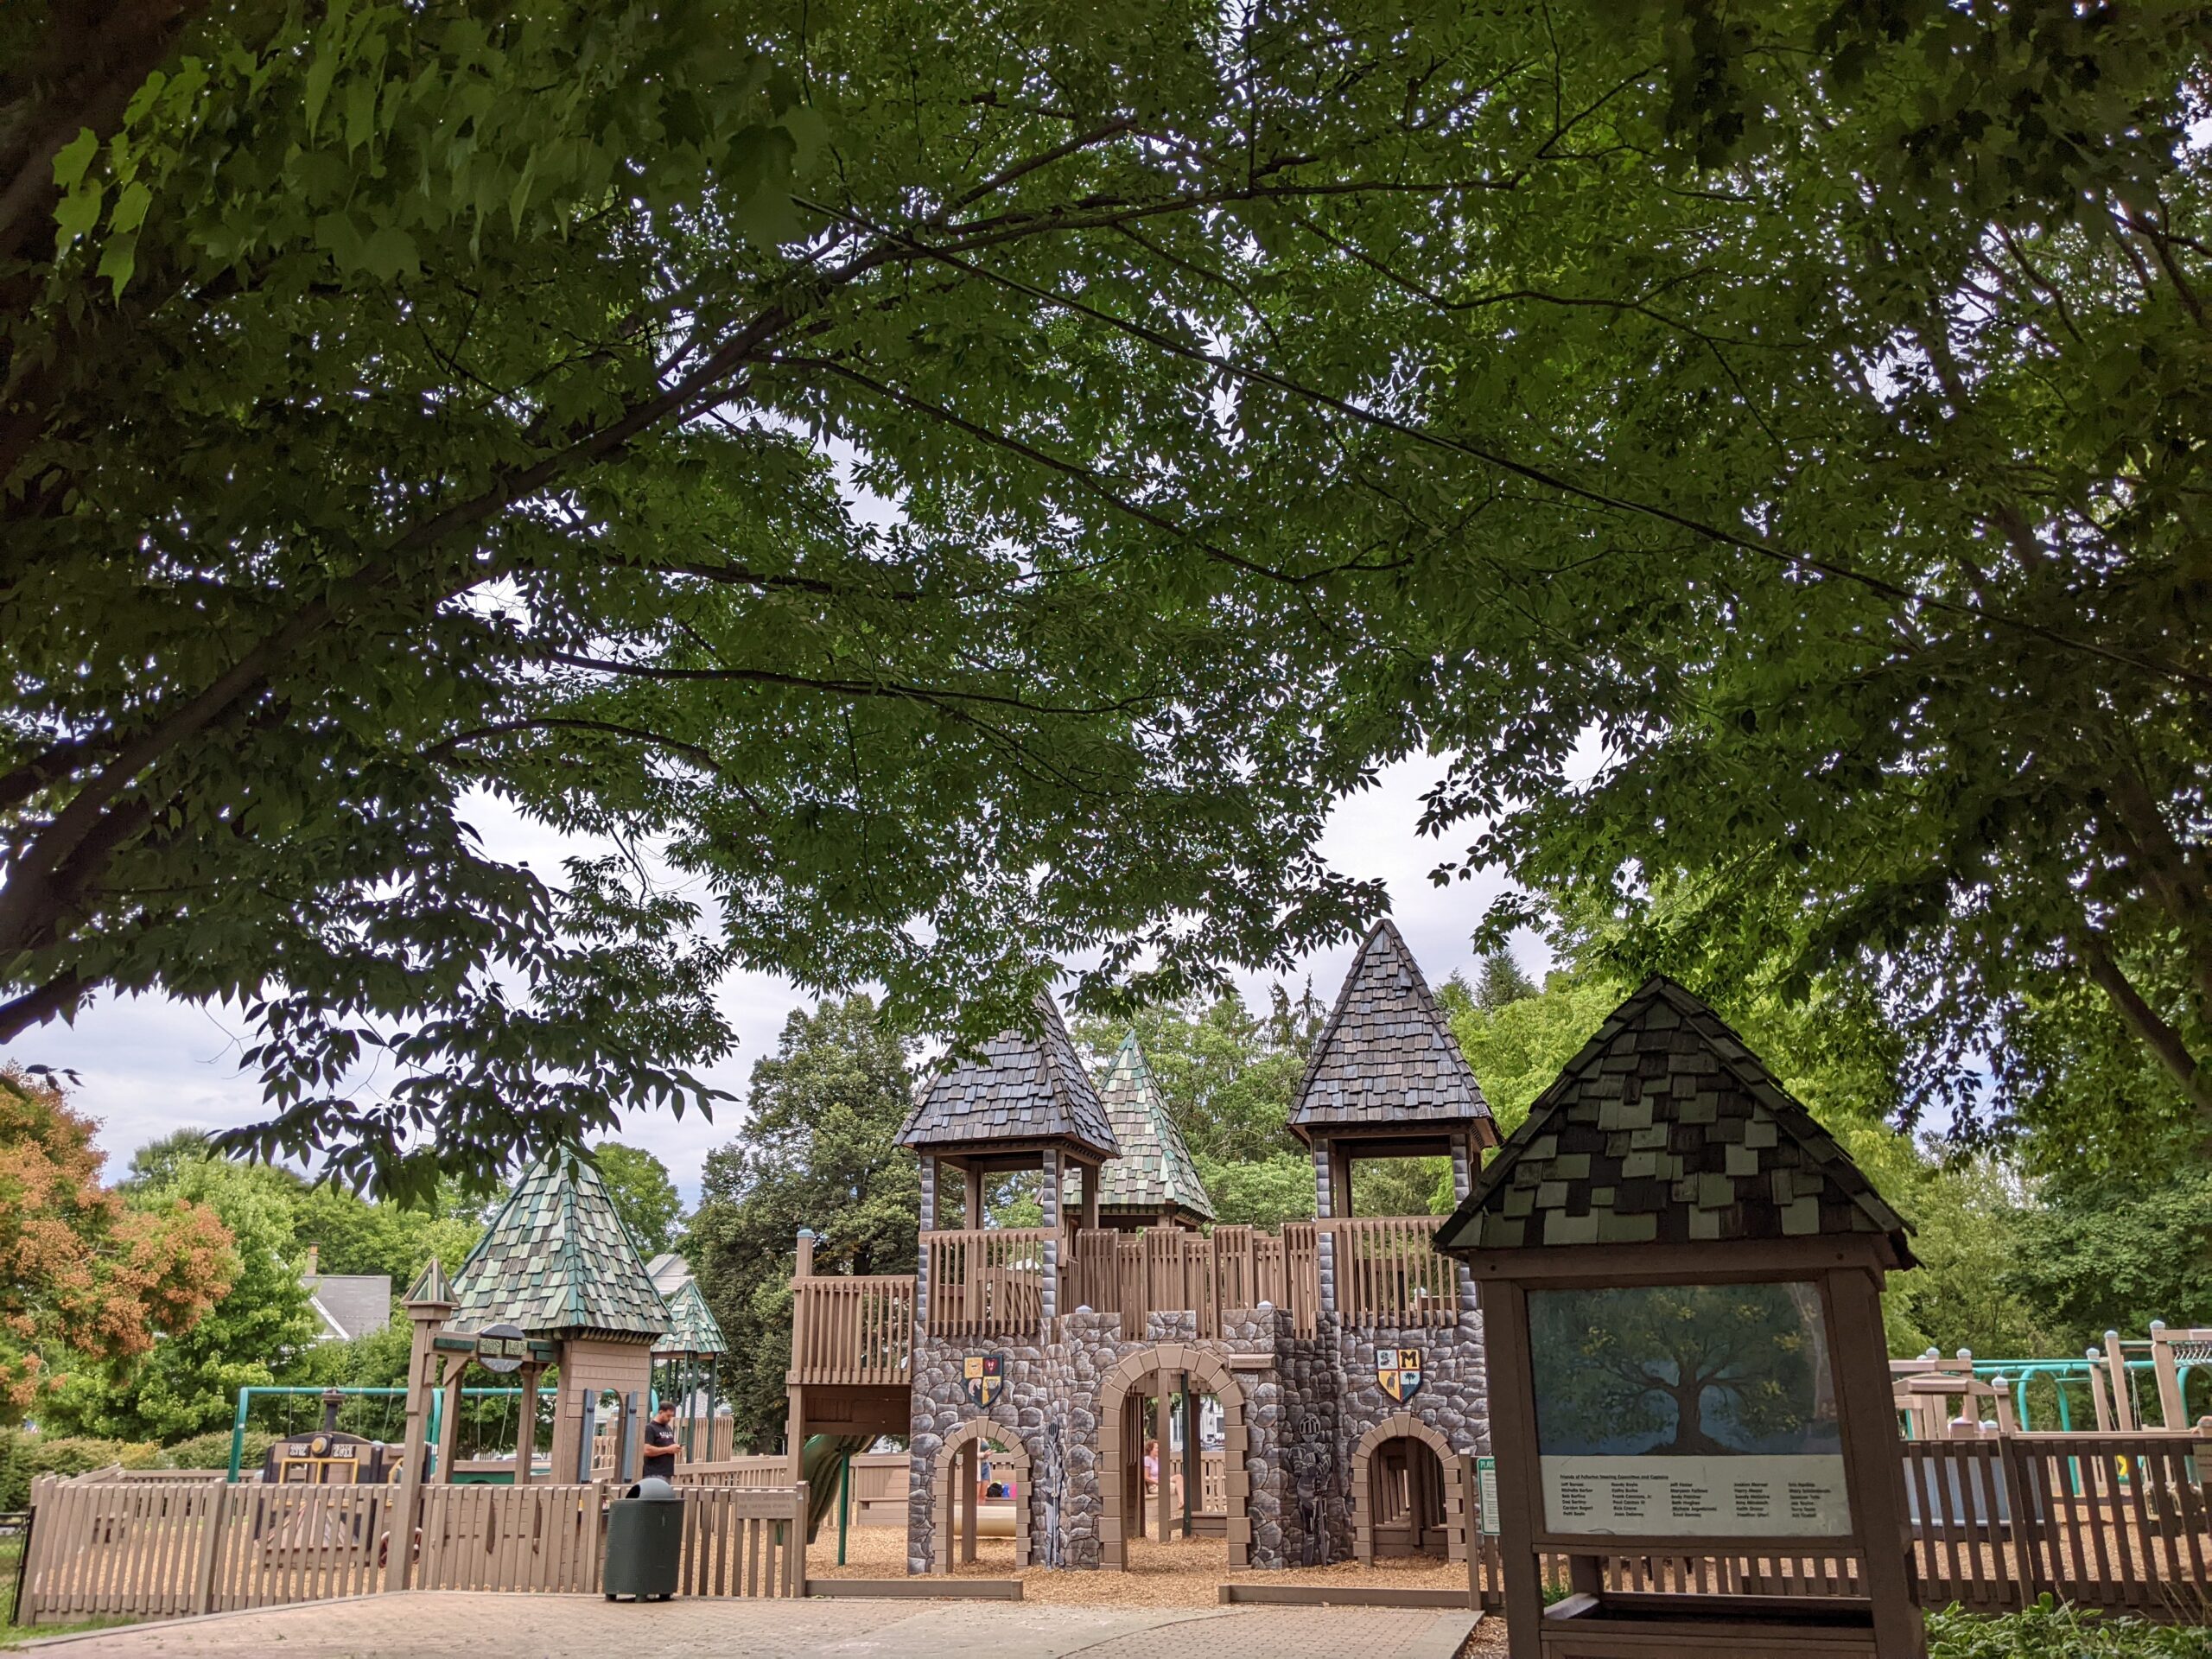 Frank Fullerton Memorial Park Playground in Moorestown NJ - WIDE image - front of playground